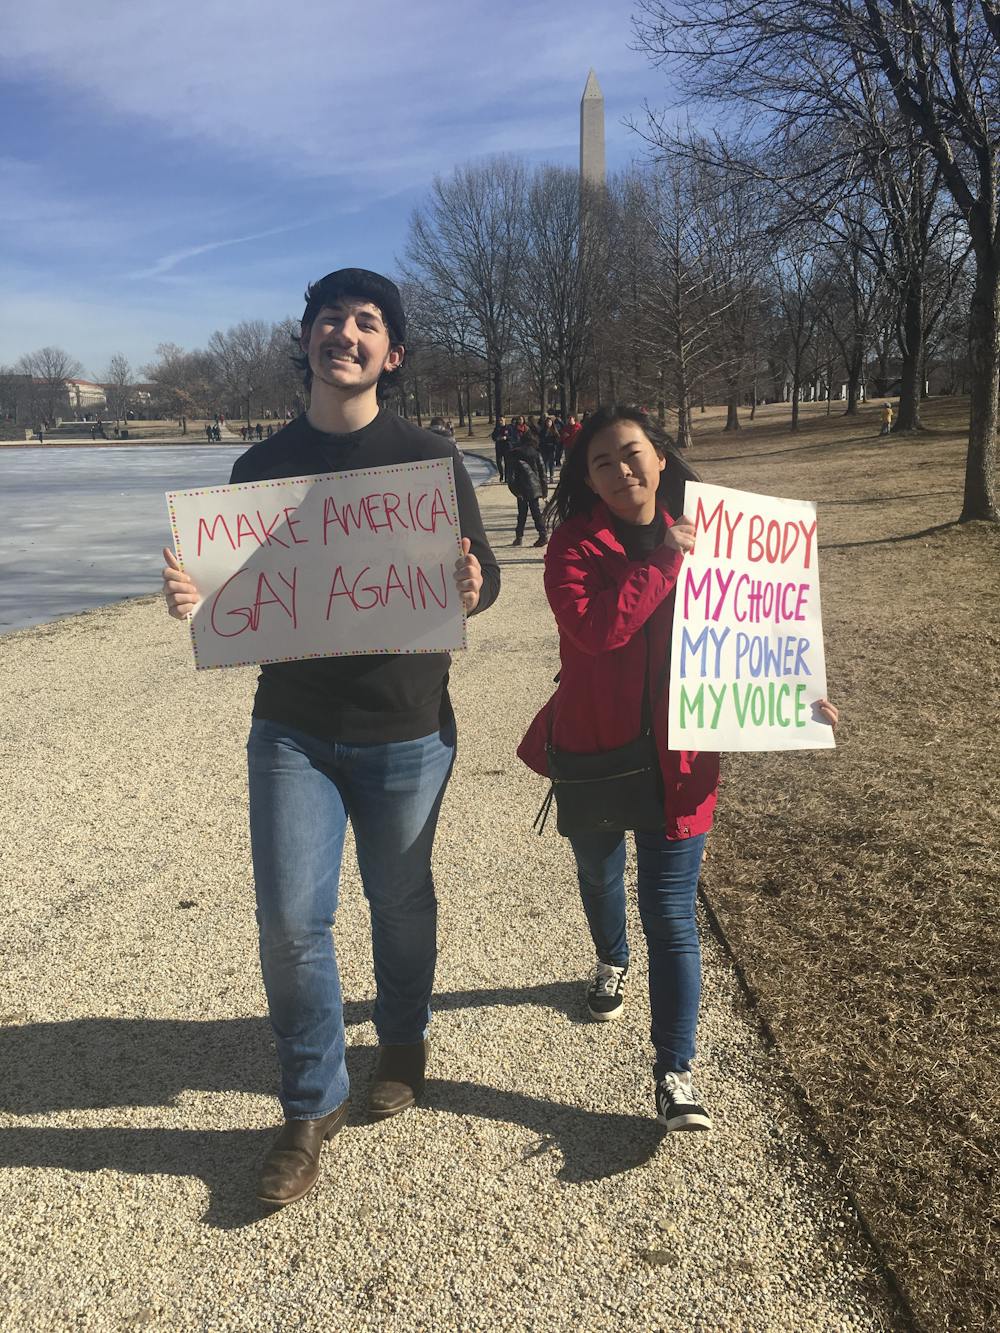 I had a ‘make America gay again’ sign at the 2018 Women’s March.